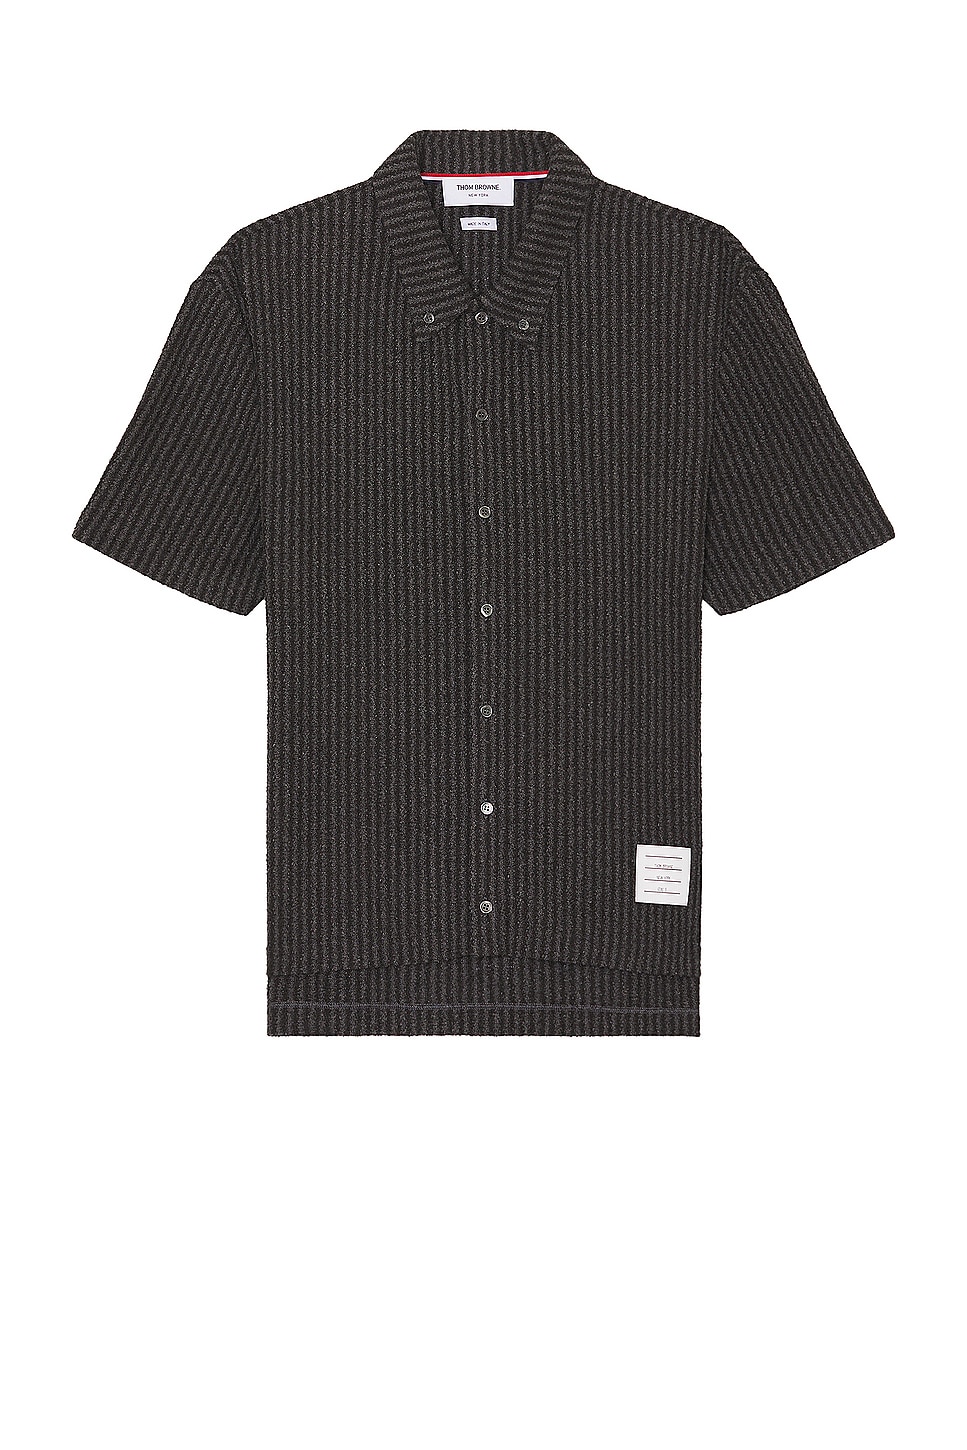 Image 1 of Thom Browne Short Sleeve Button Down Shirt in Medium Grey